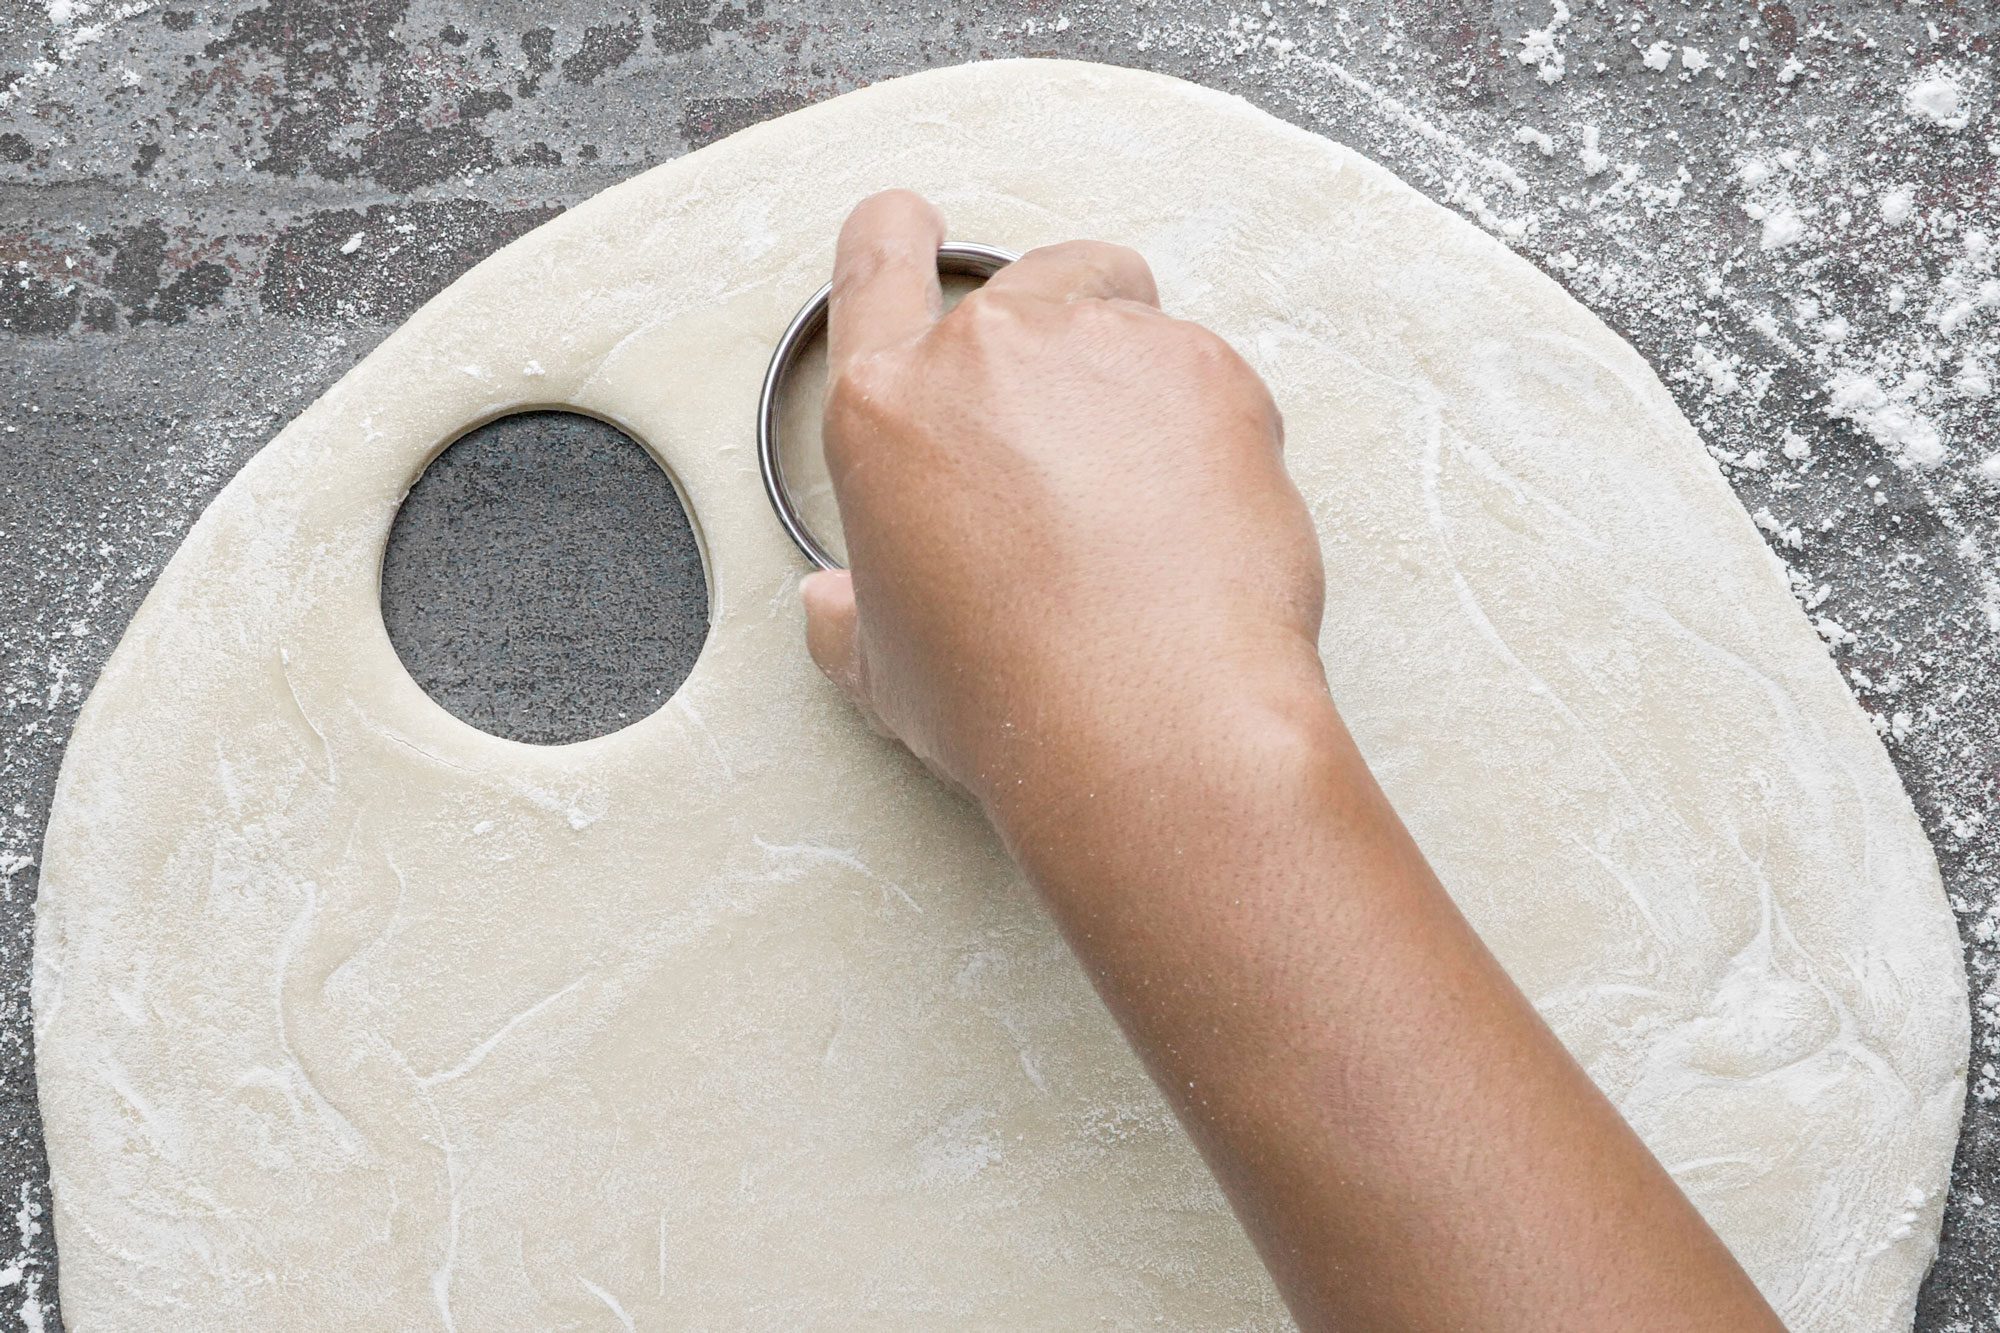 cutting the dough into a round shape with a dough cutter